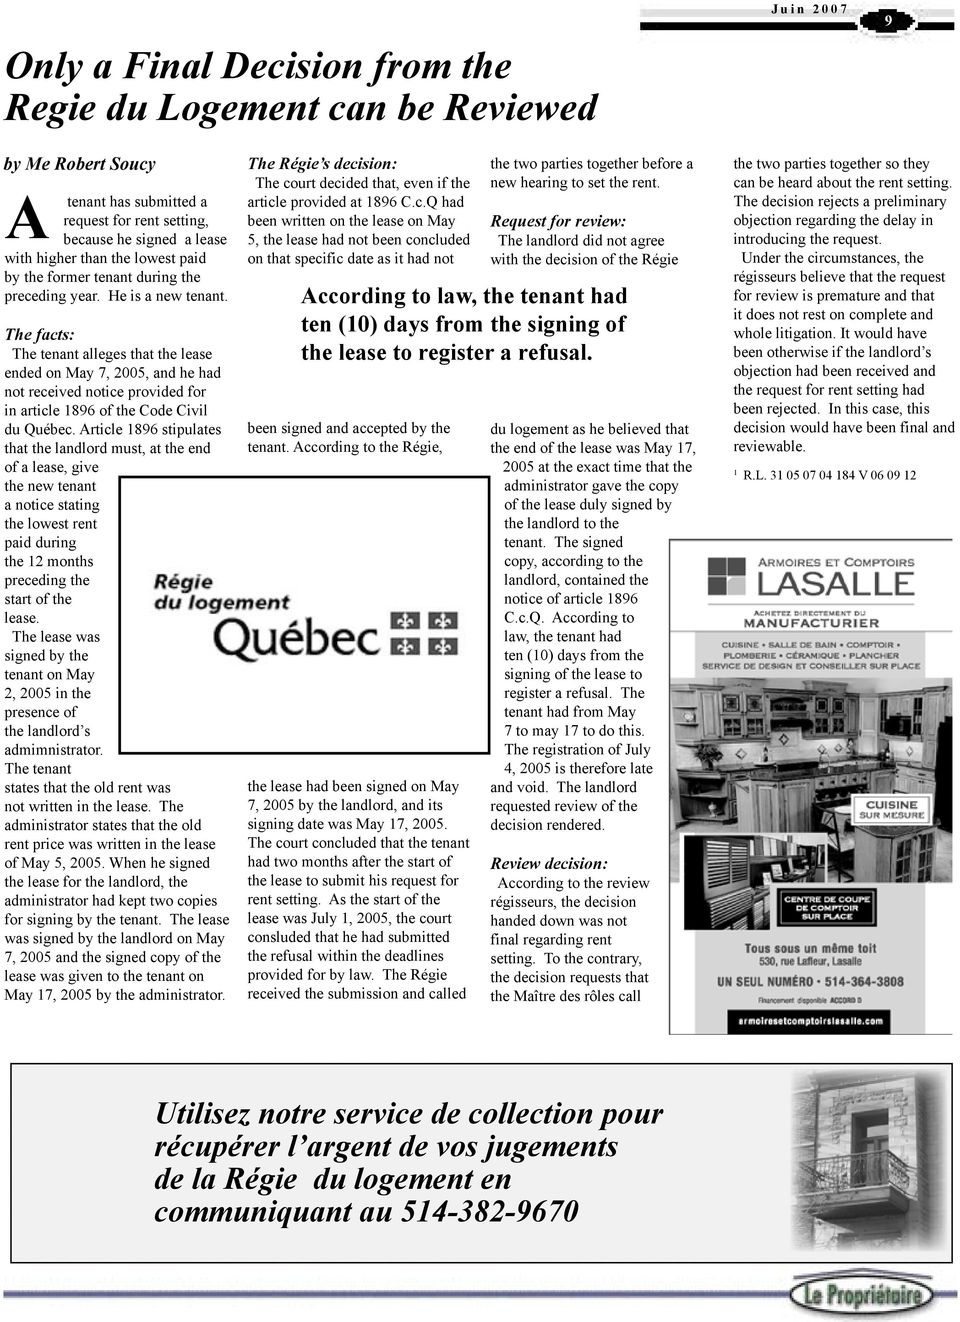 The facts: The tenant alleges that the lease ended on May 7, 2005, and he had not received notice provided for in article 1896 of the Code Civil du Québec.